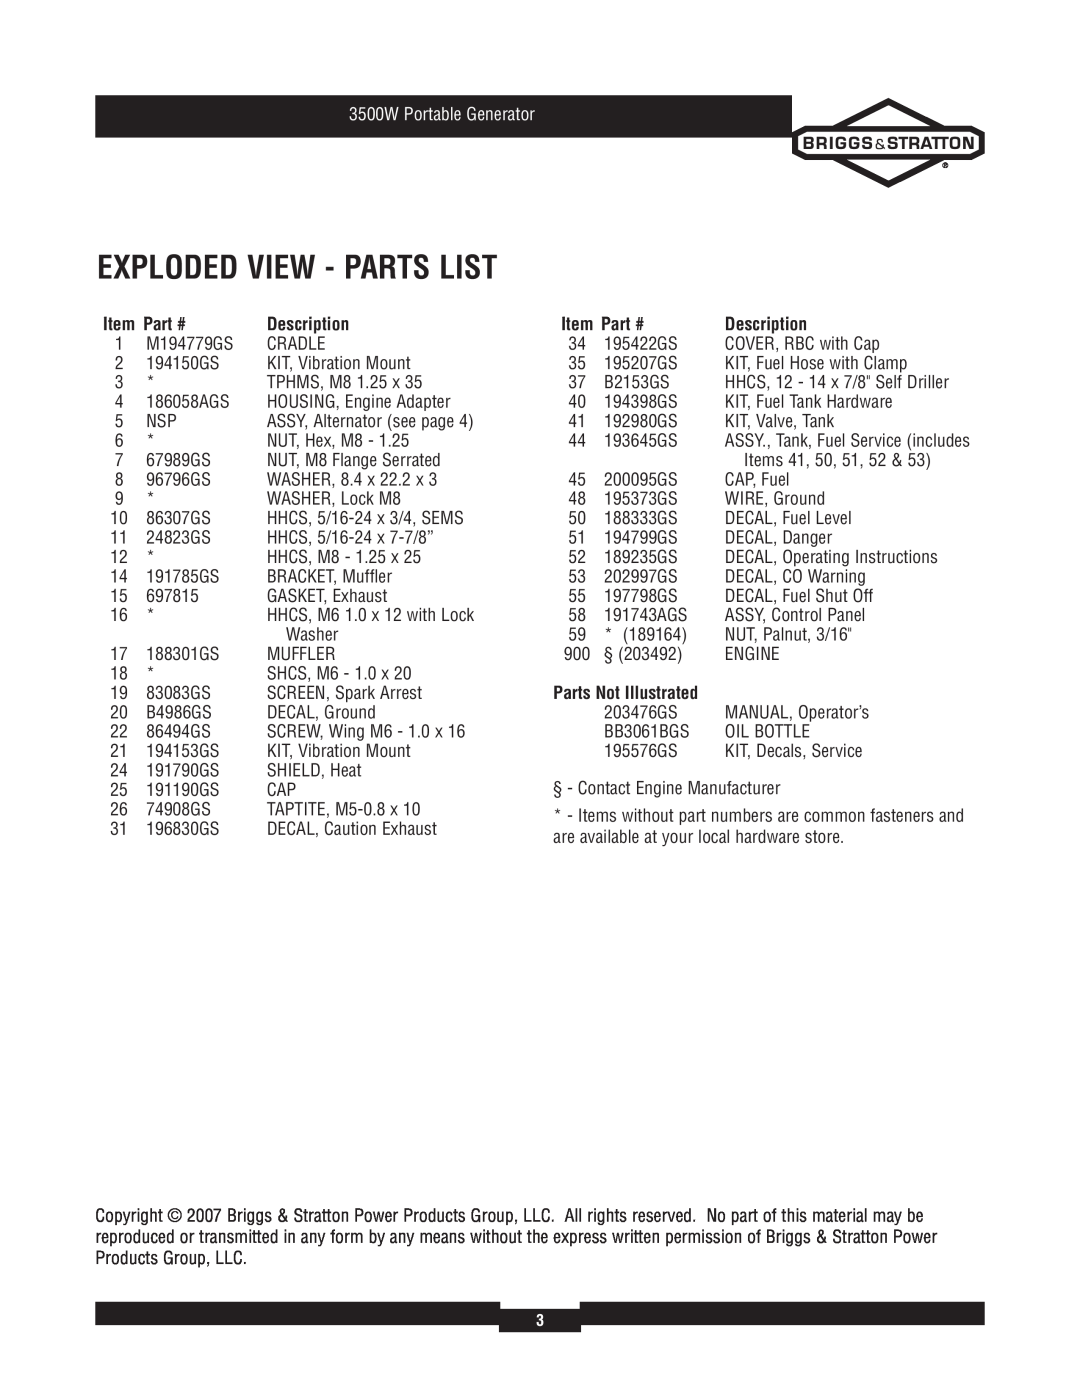 Briggs & Stratton 030208-2 manual Exploded View - Parts List, Description, Parts Not Illustrated, 3500W Portable Generator 